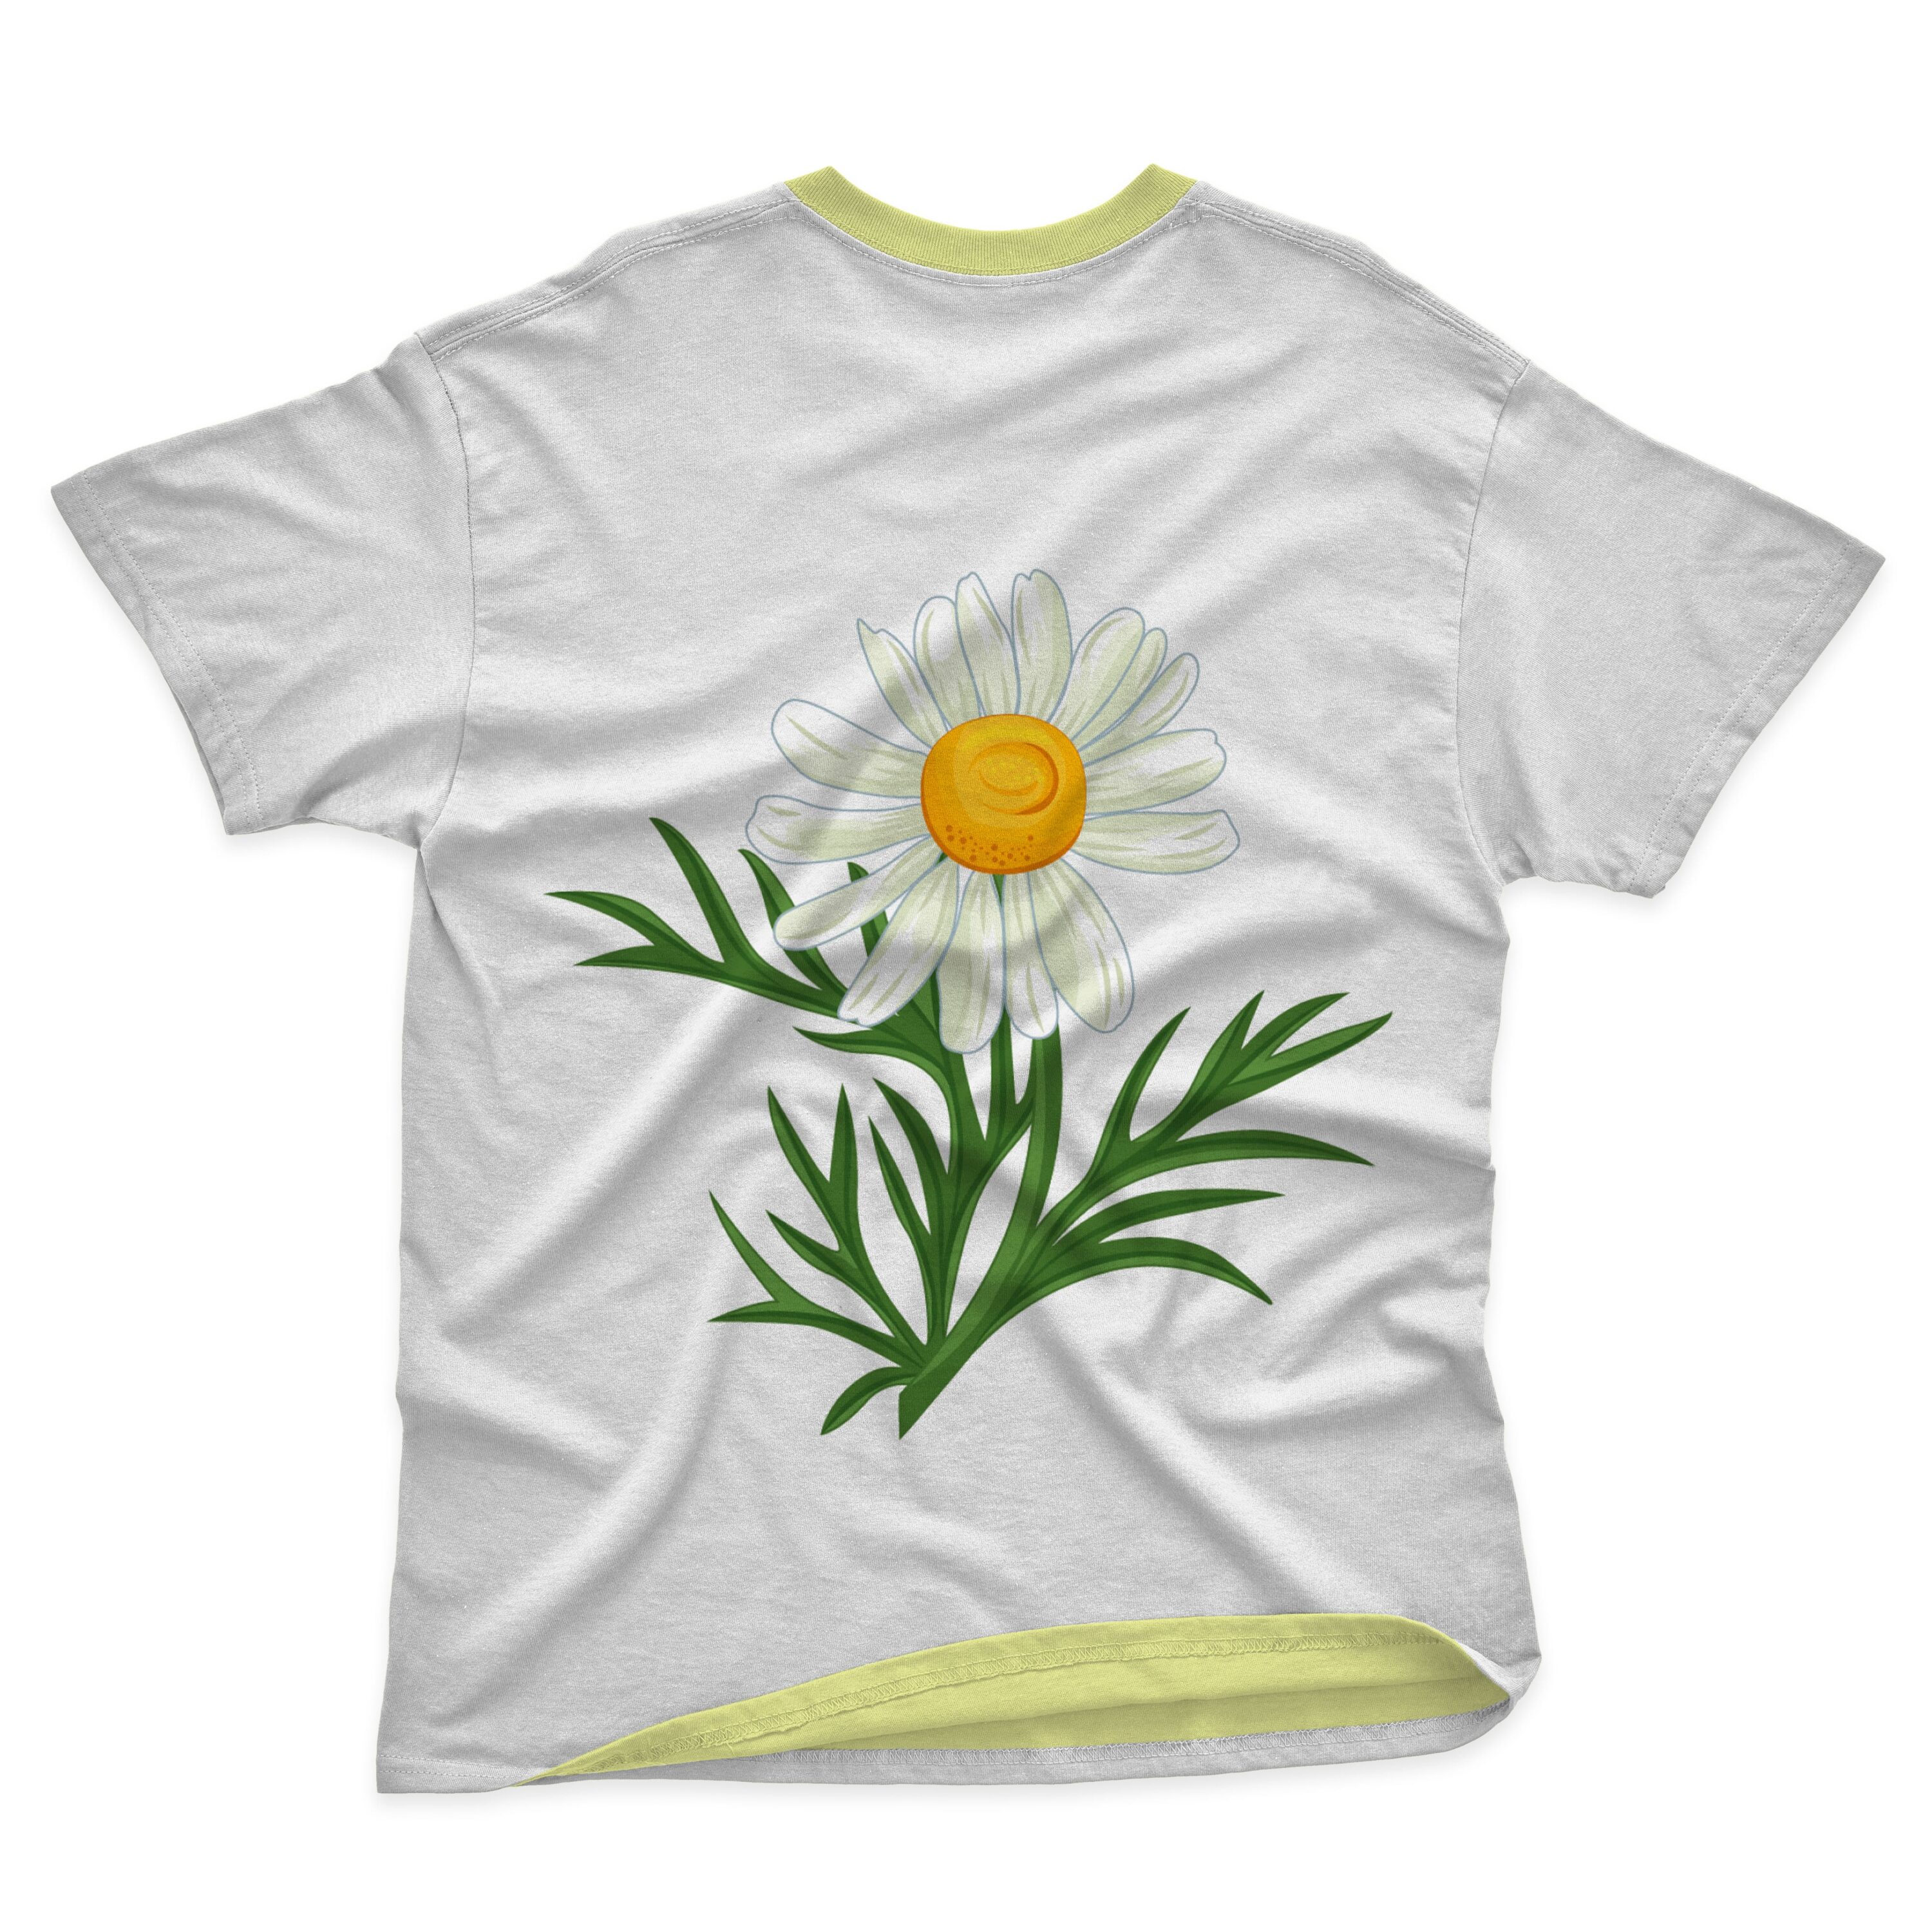 Simple daisy printed on the t-shirt.